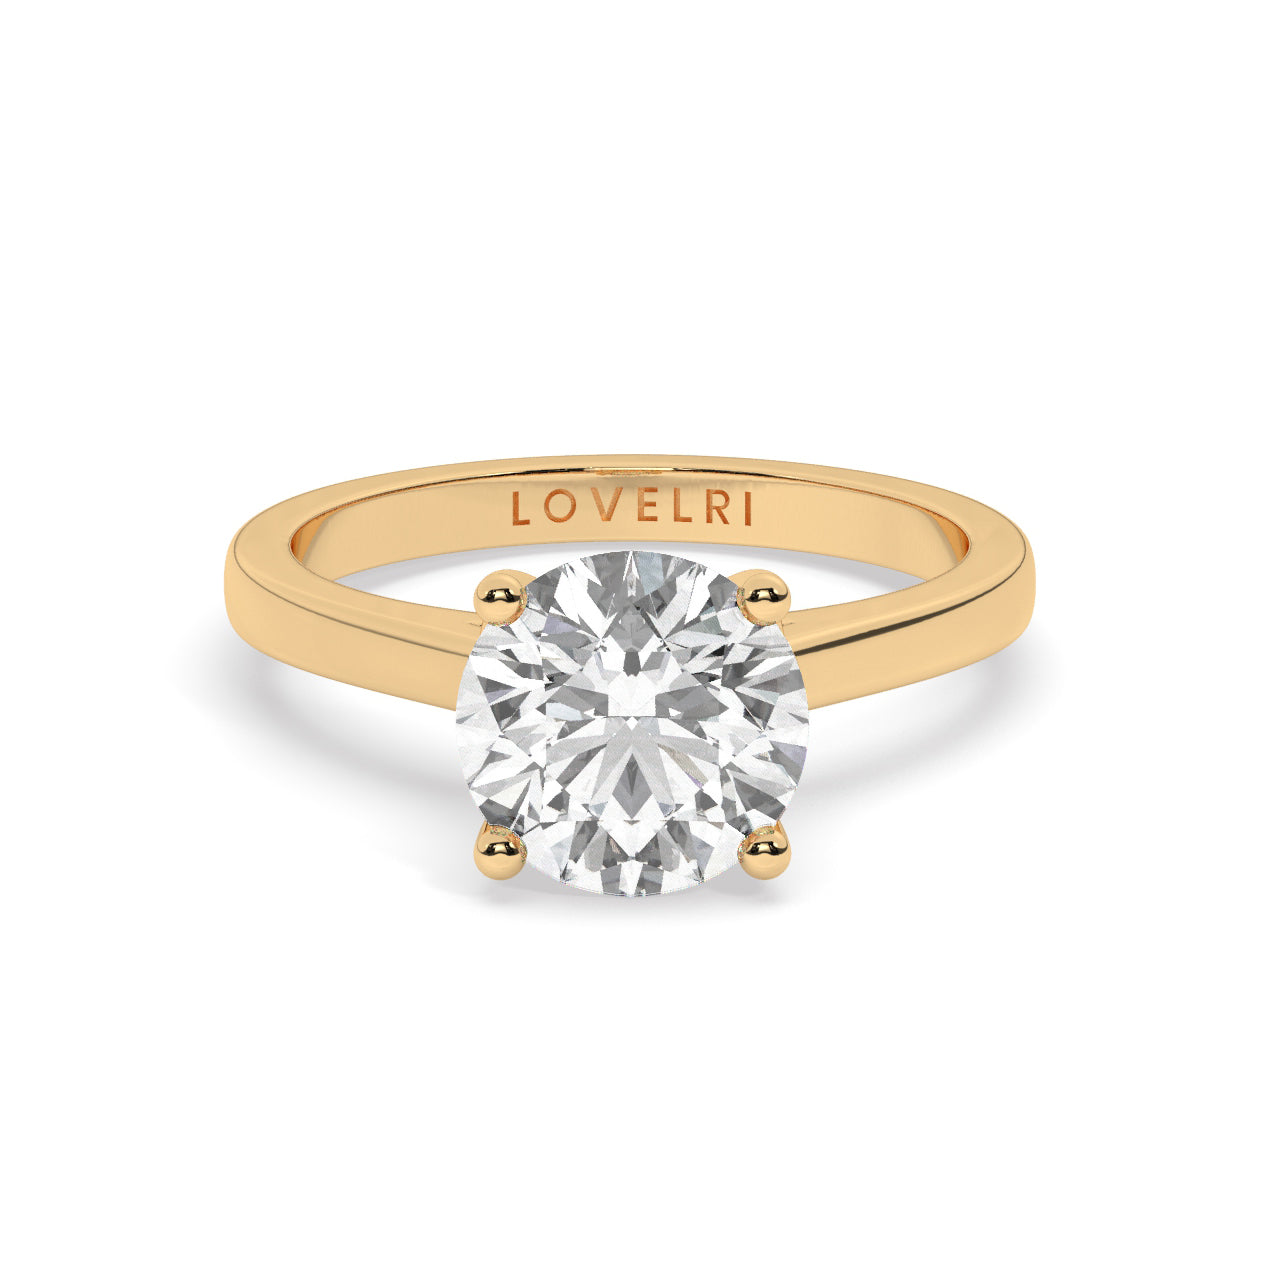 Yellow Gold Round Cut Solitaire Engagement Ring with a Hidden Stone